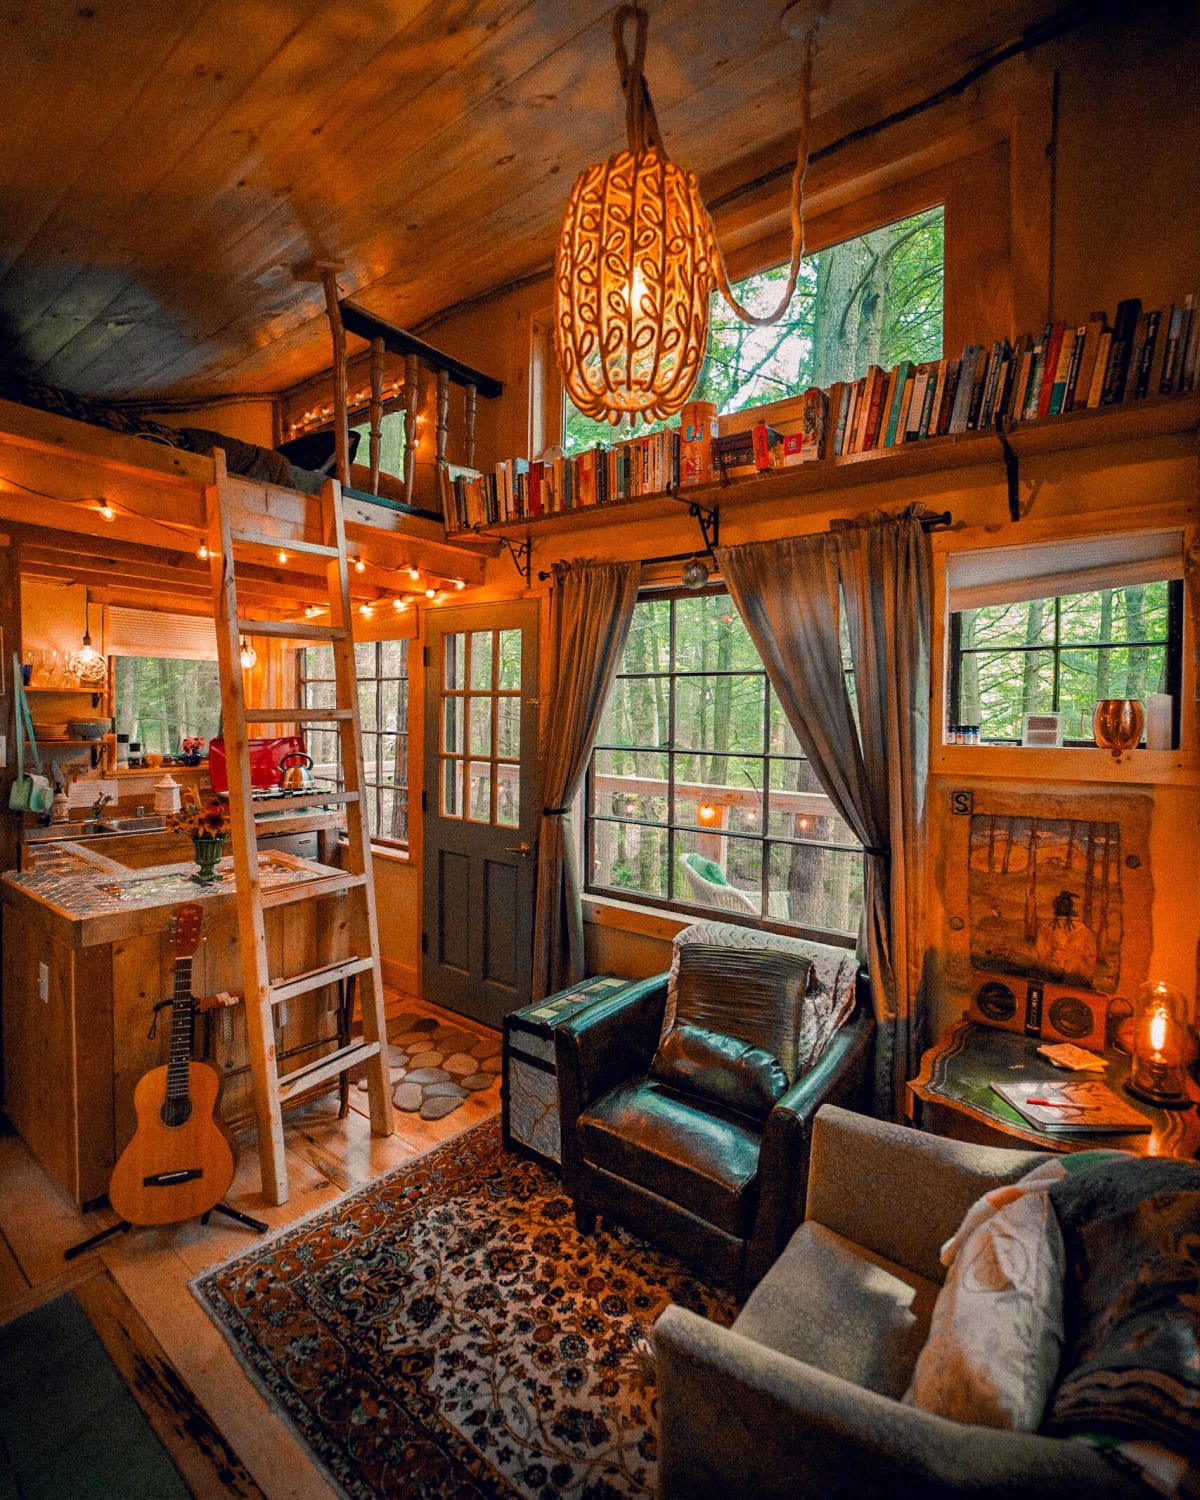 Life inside a cozy Vermont treehouse